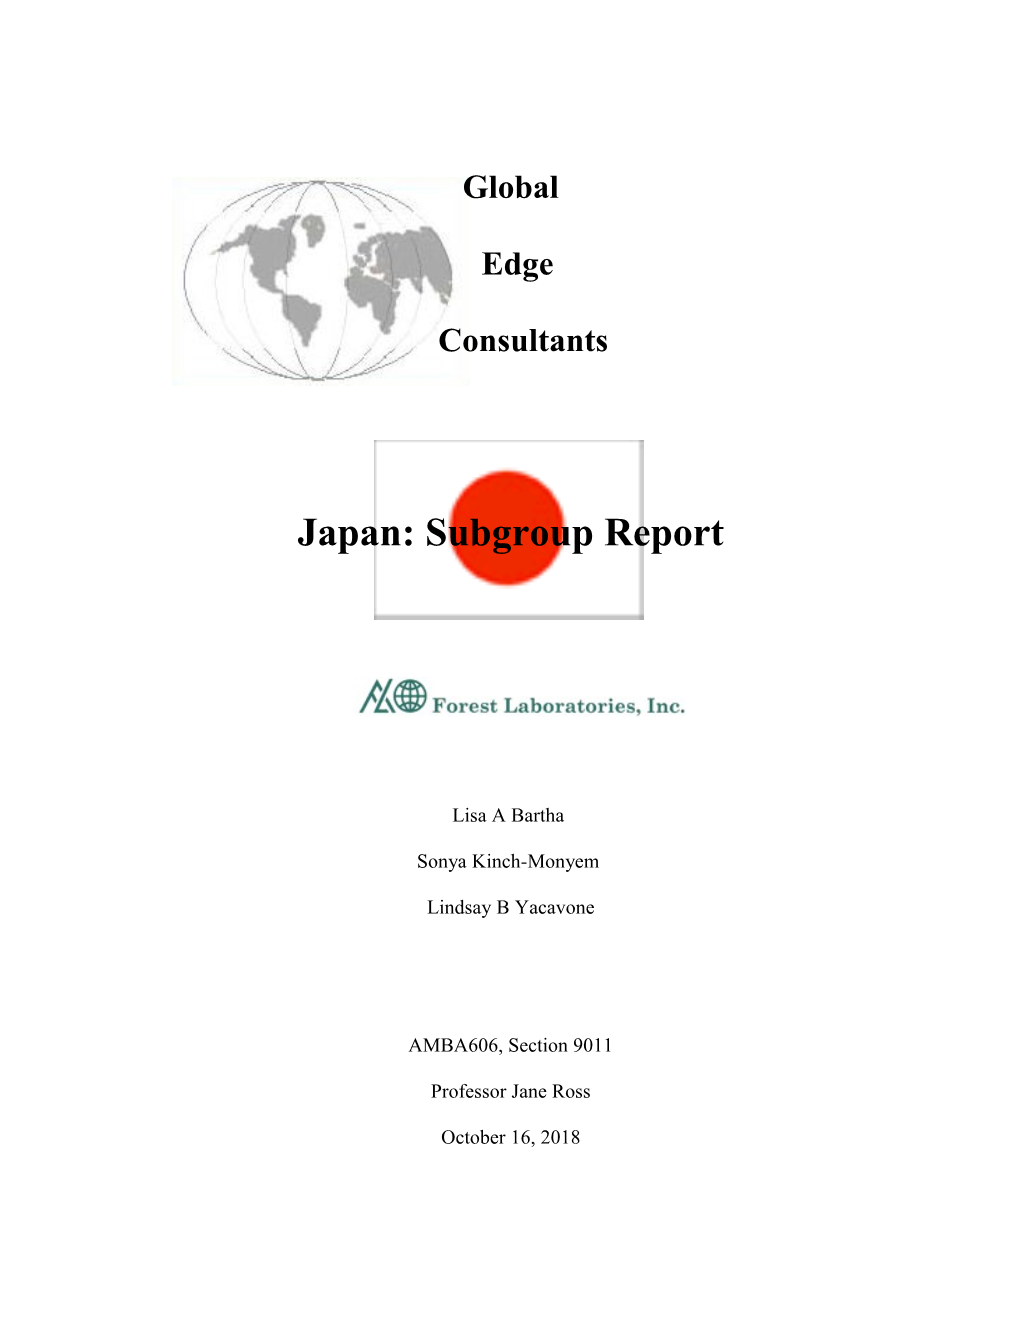 Opportunities and Risks Associated with Doing Business in Japan